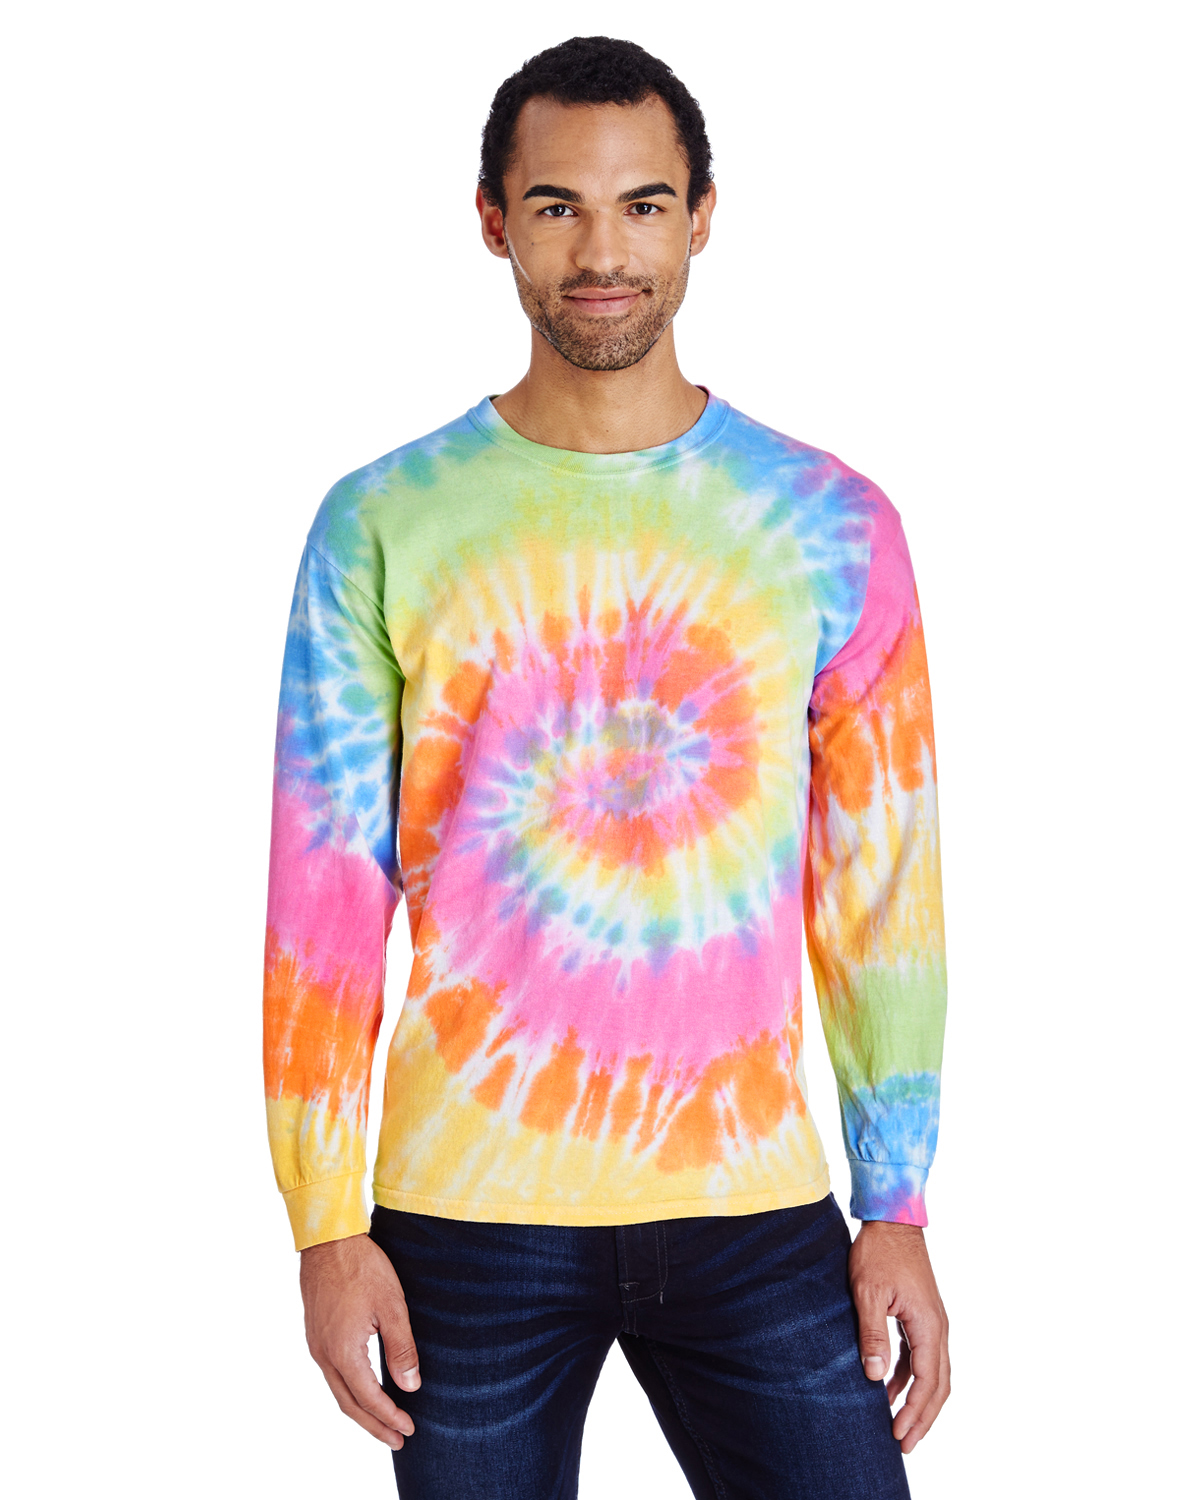 21-008-Yellow & Pink Tie Dye Long Sleeve Shirt By Blue84